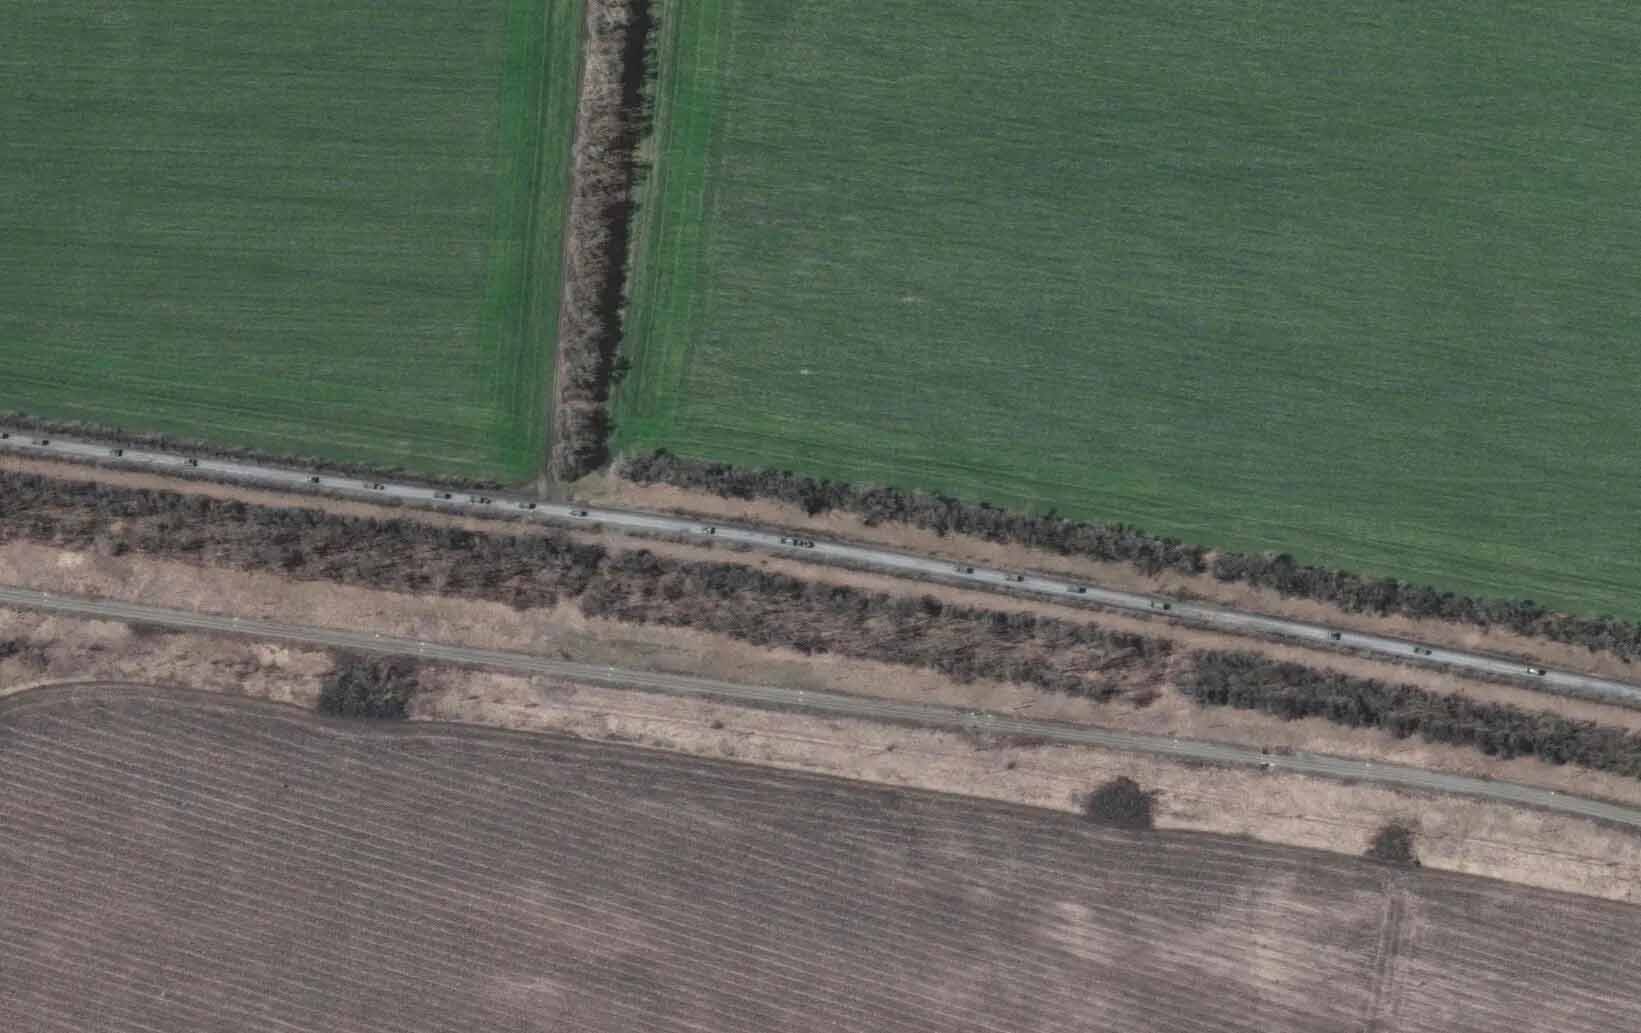 Satellite imagery shows a huge Russian convoy heading to Izyum, Ukraine